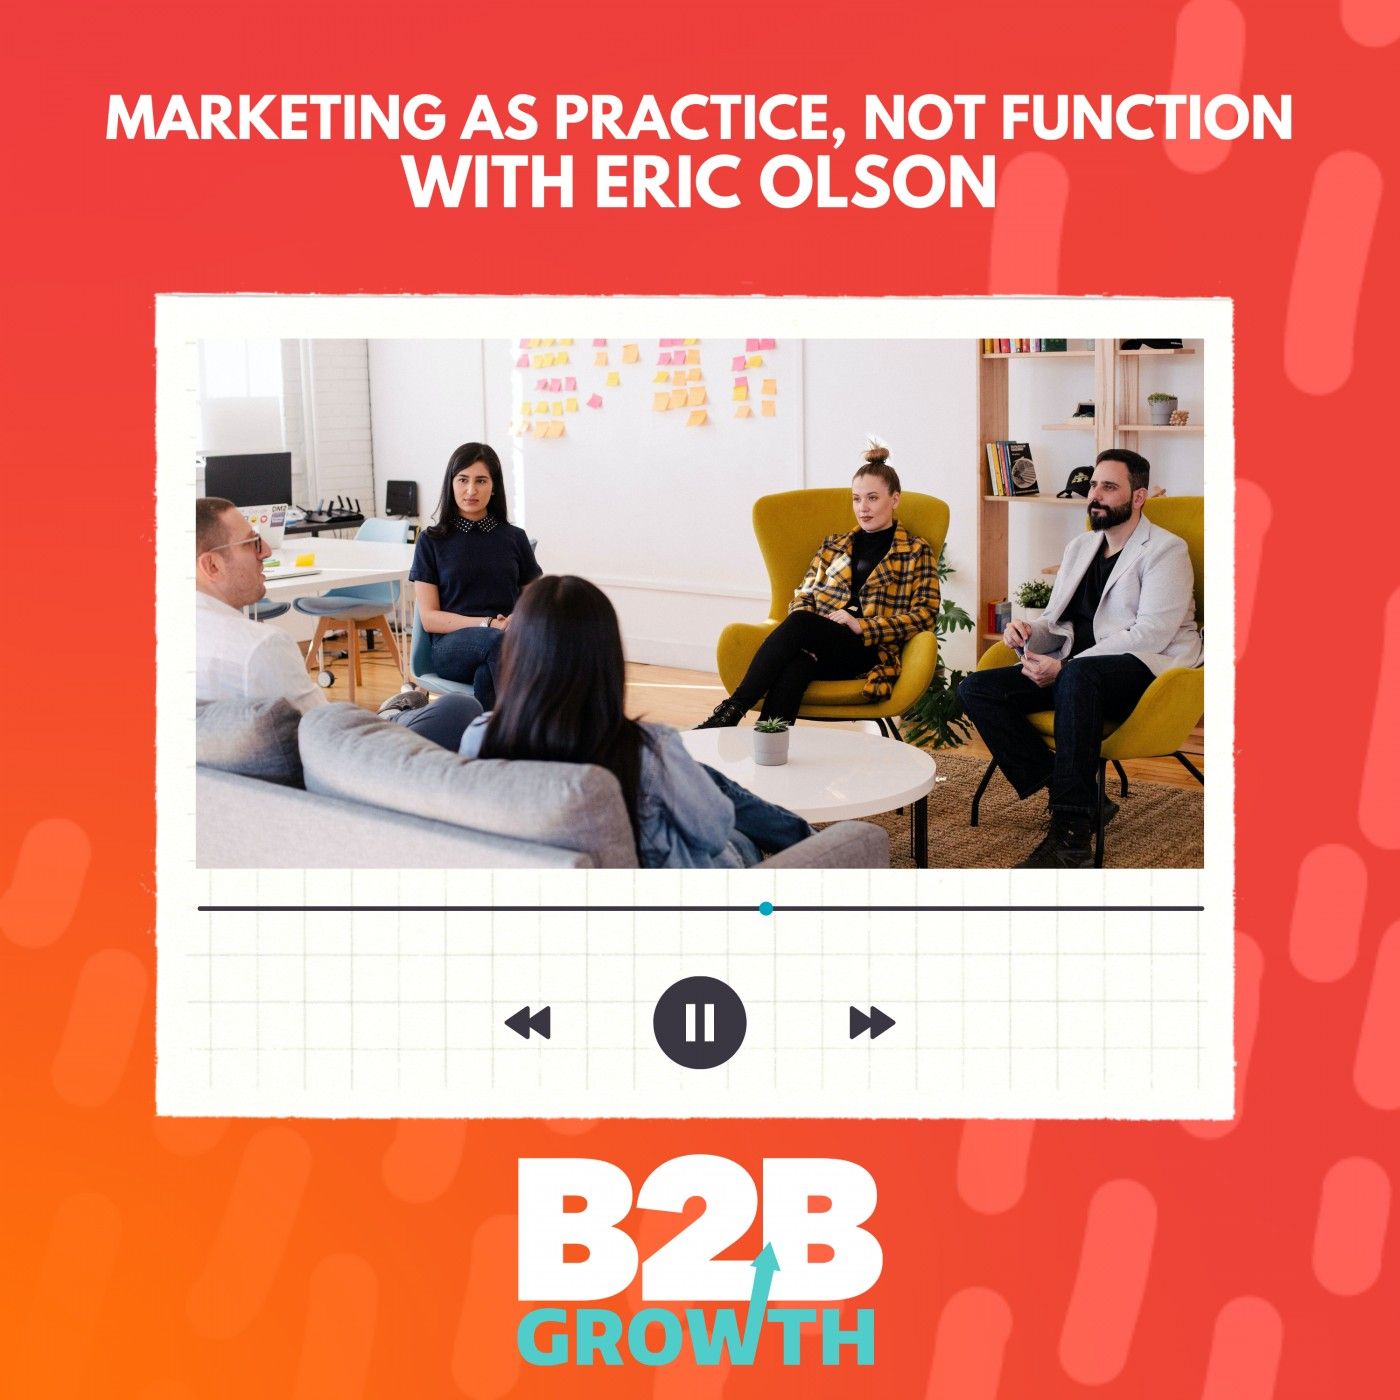 Marketing as Practice, Not Function, with Eric Olson